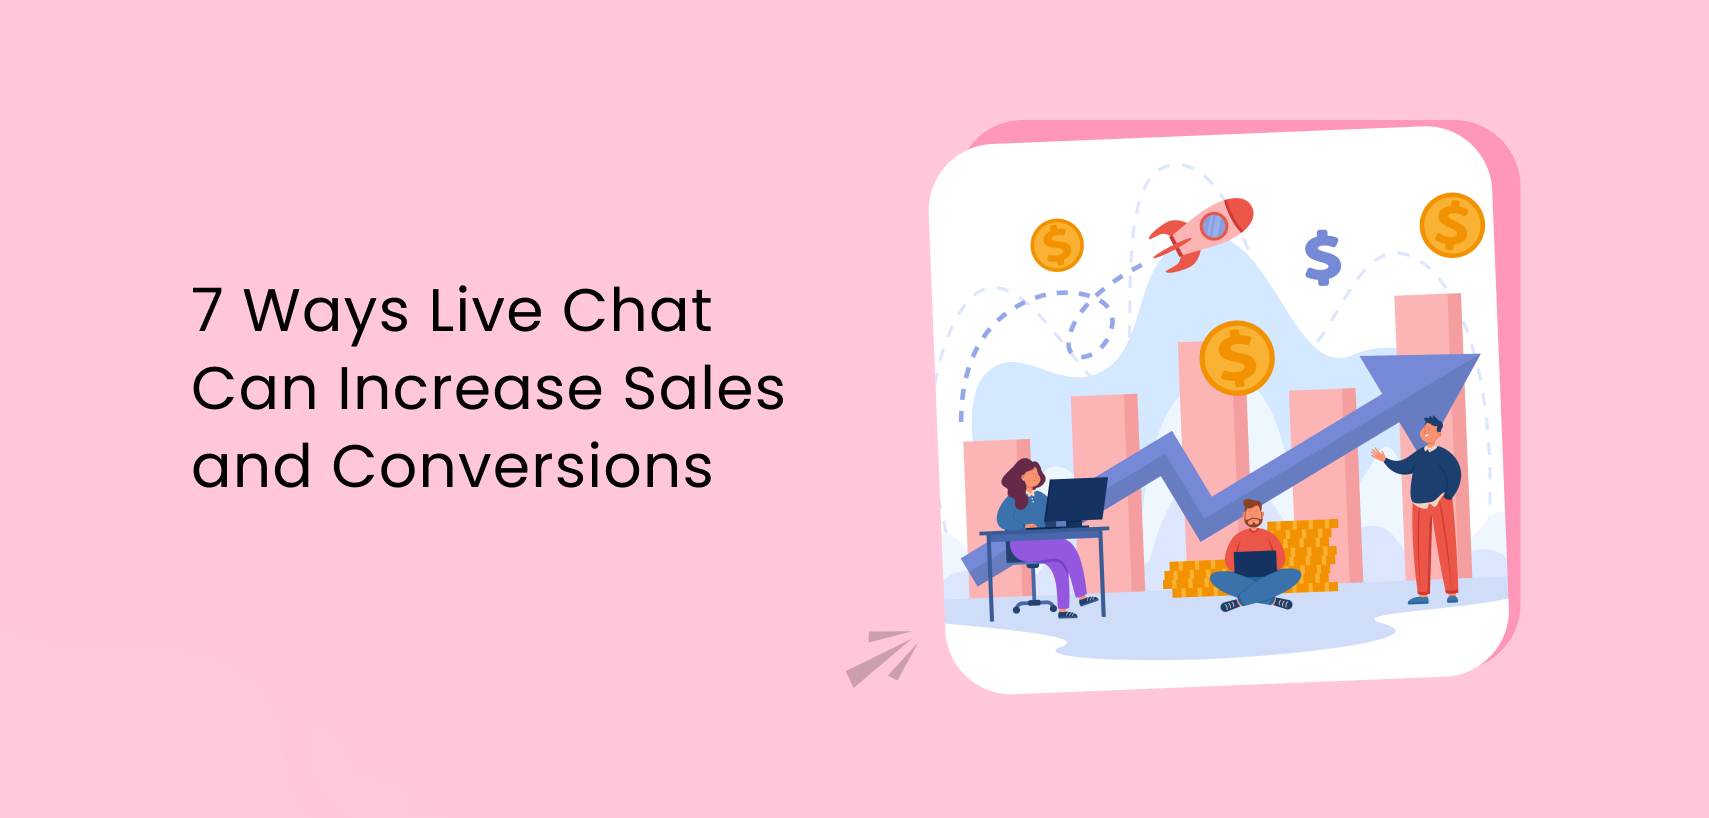 7 Ways Live Chat Can Increase Sales and Conversions